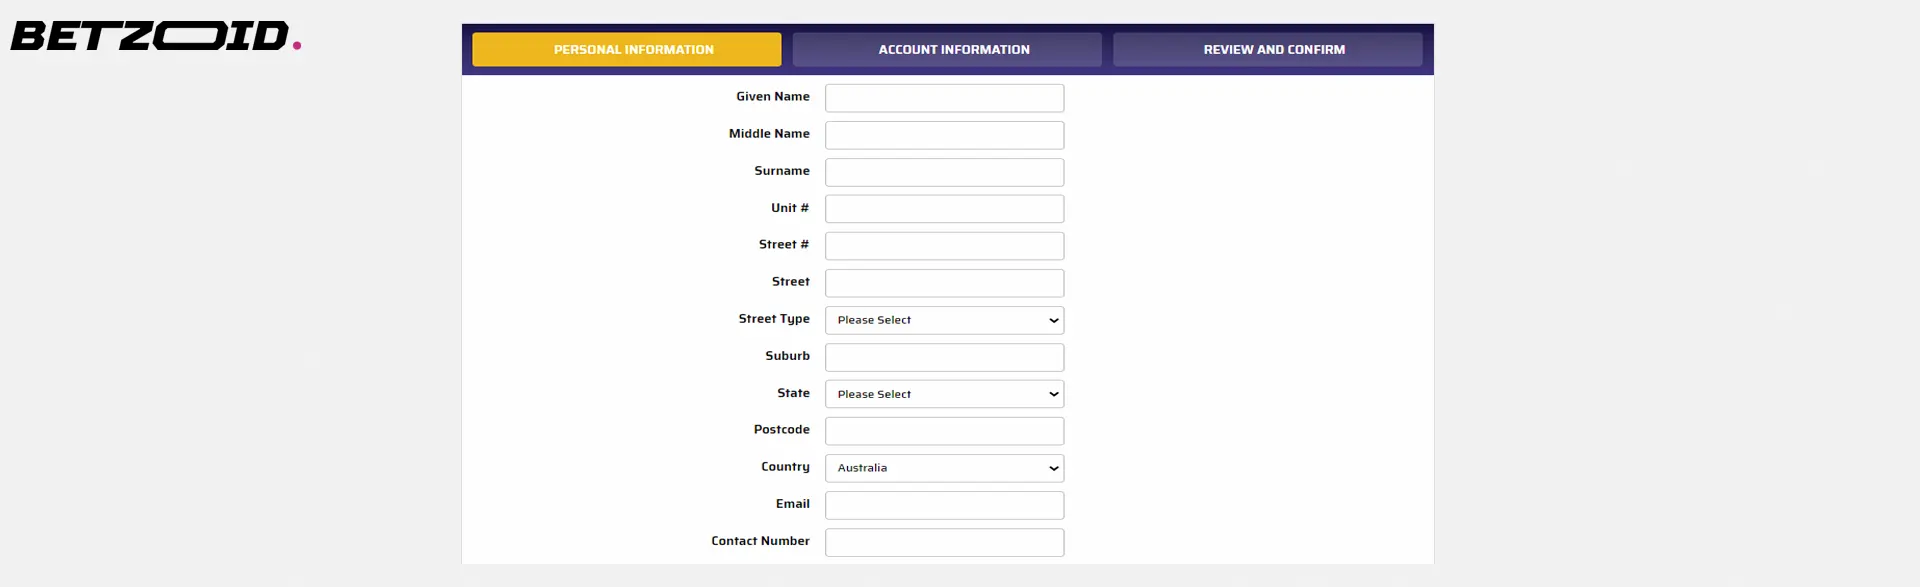 The Ultrabet login page for registering personal and account information.